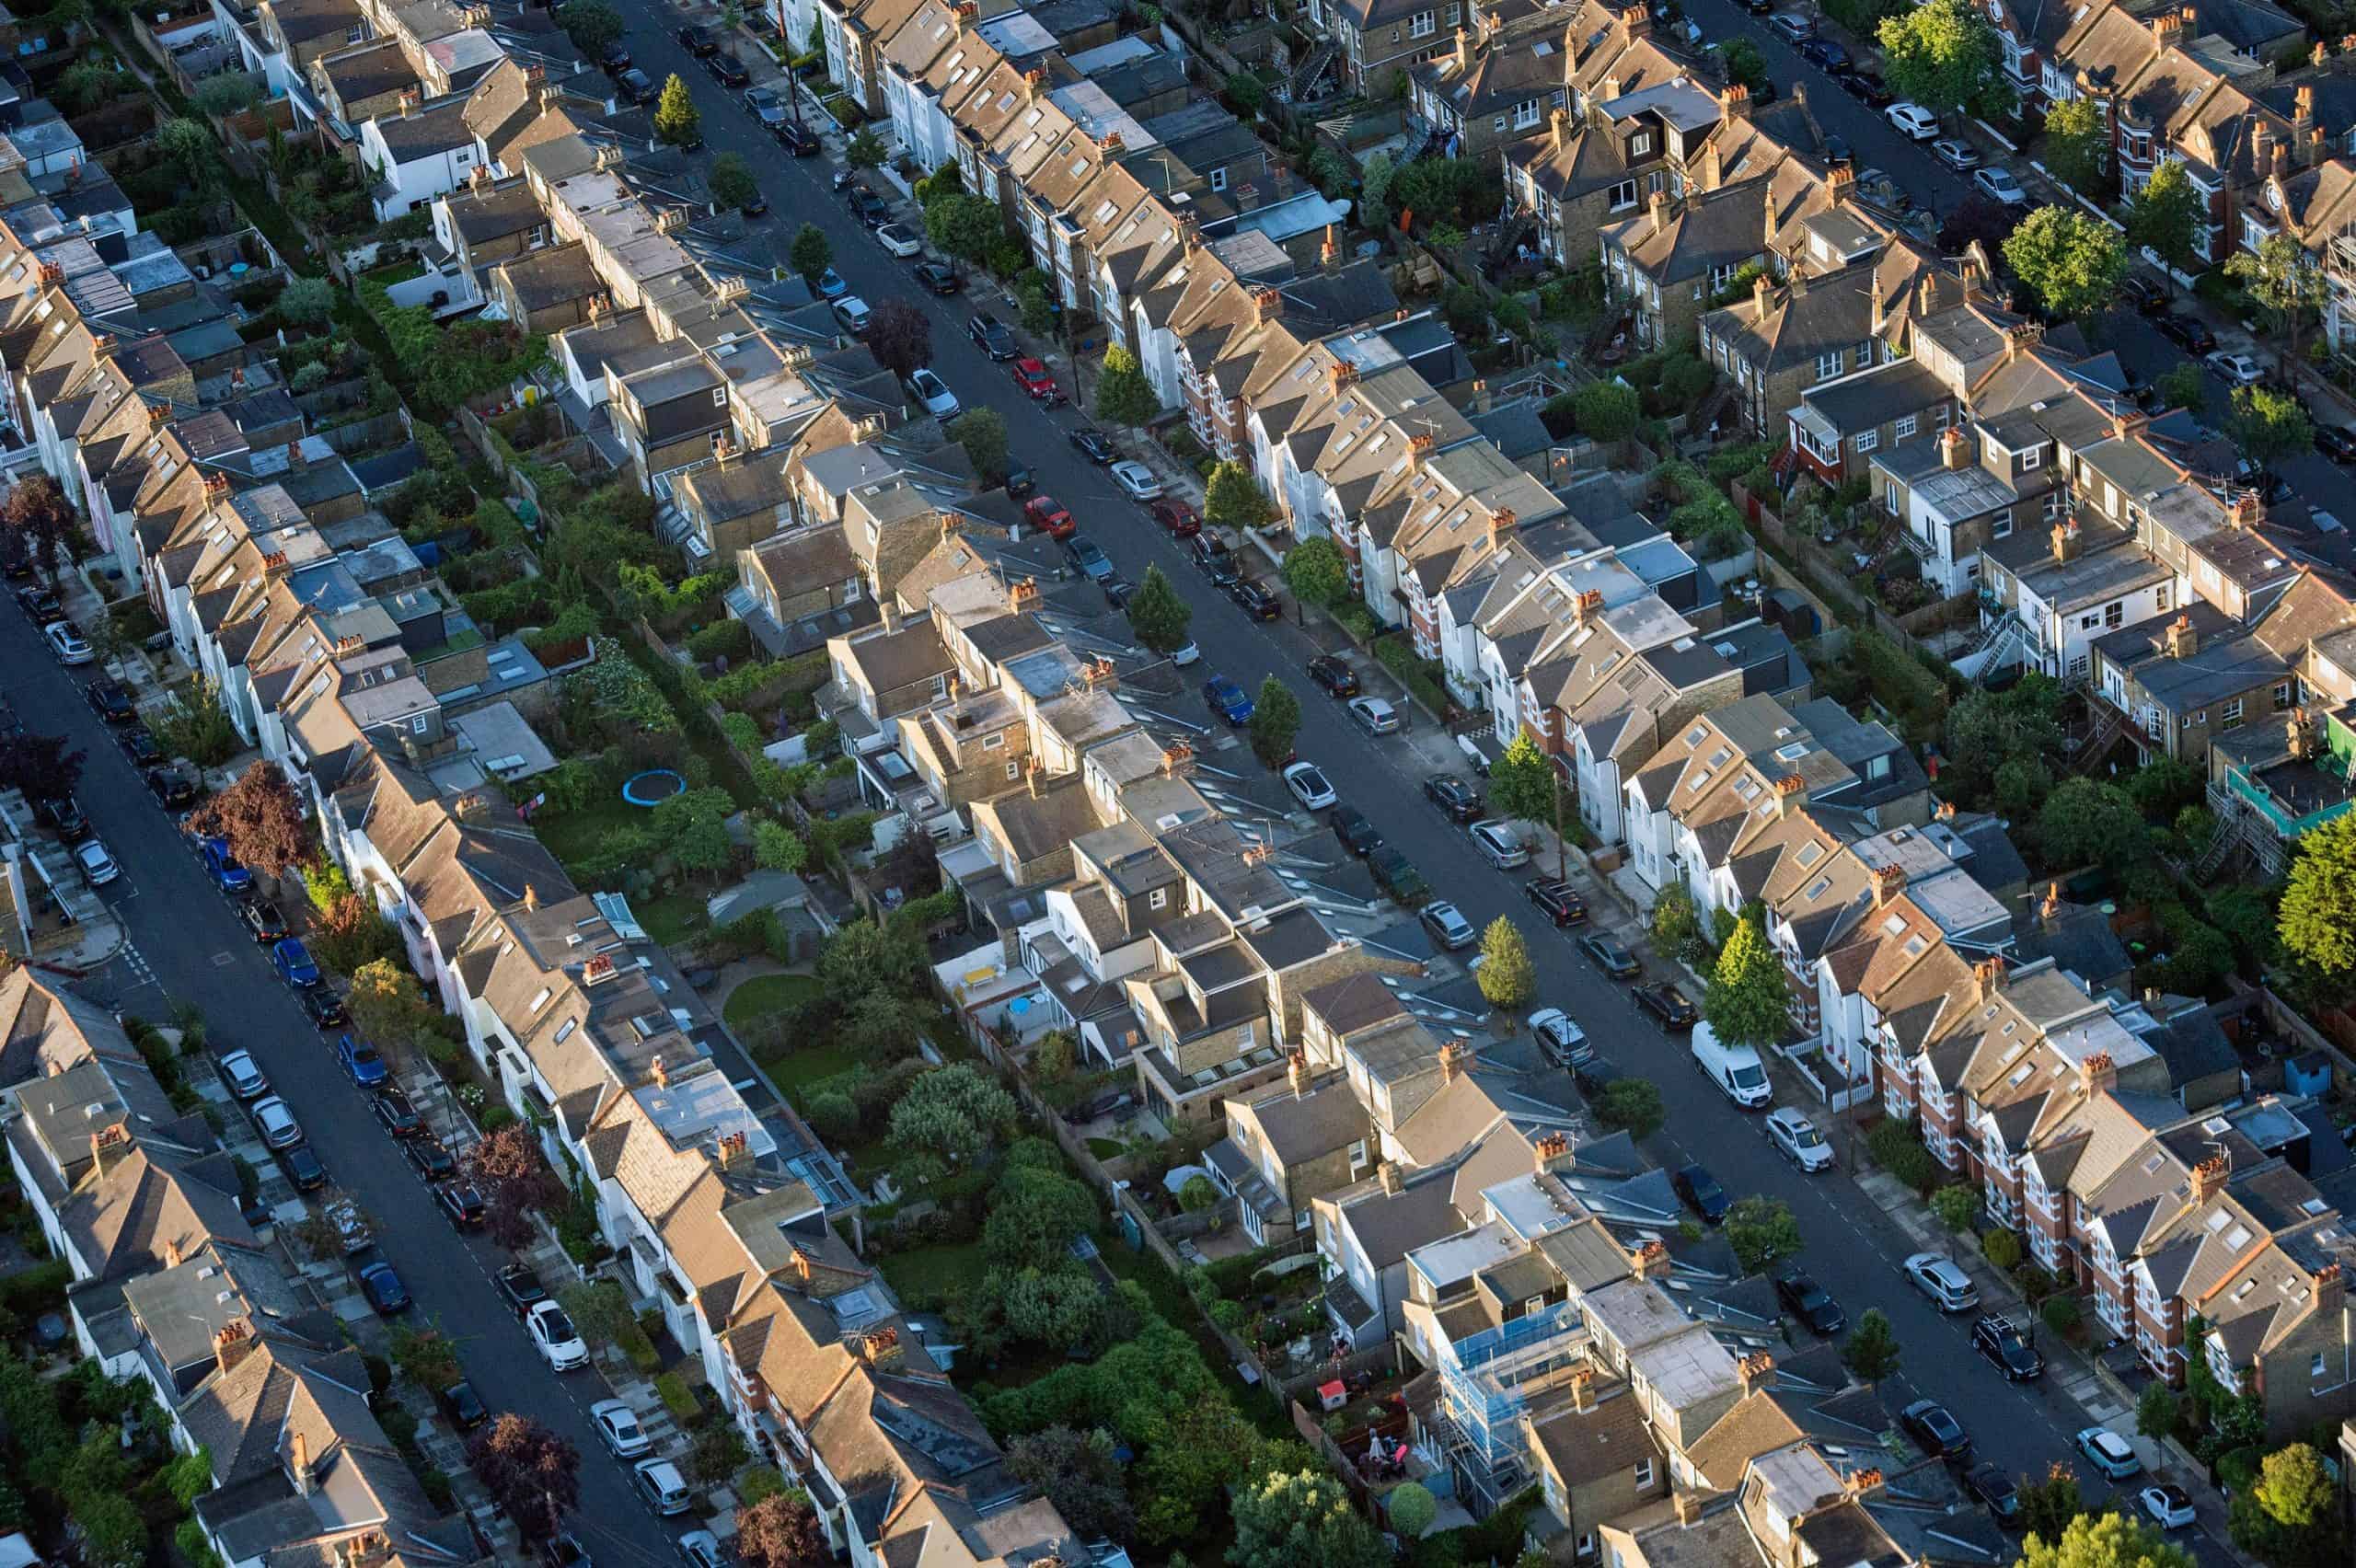 House prices grew by £27,000 last year, despite cost-of-living crisis